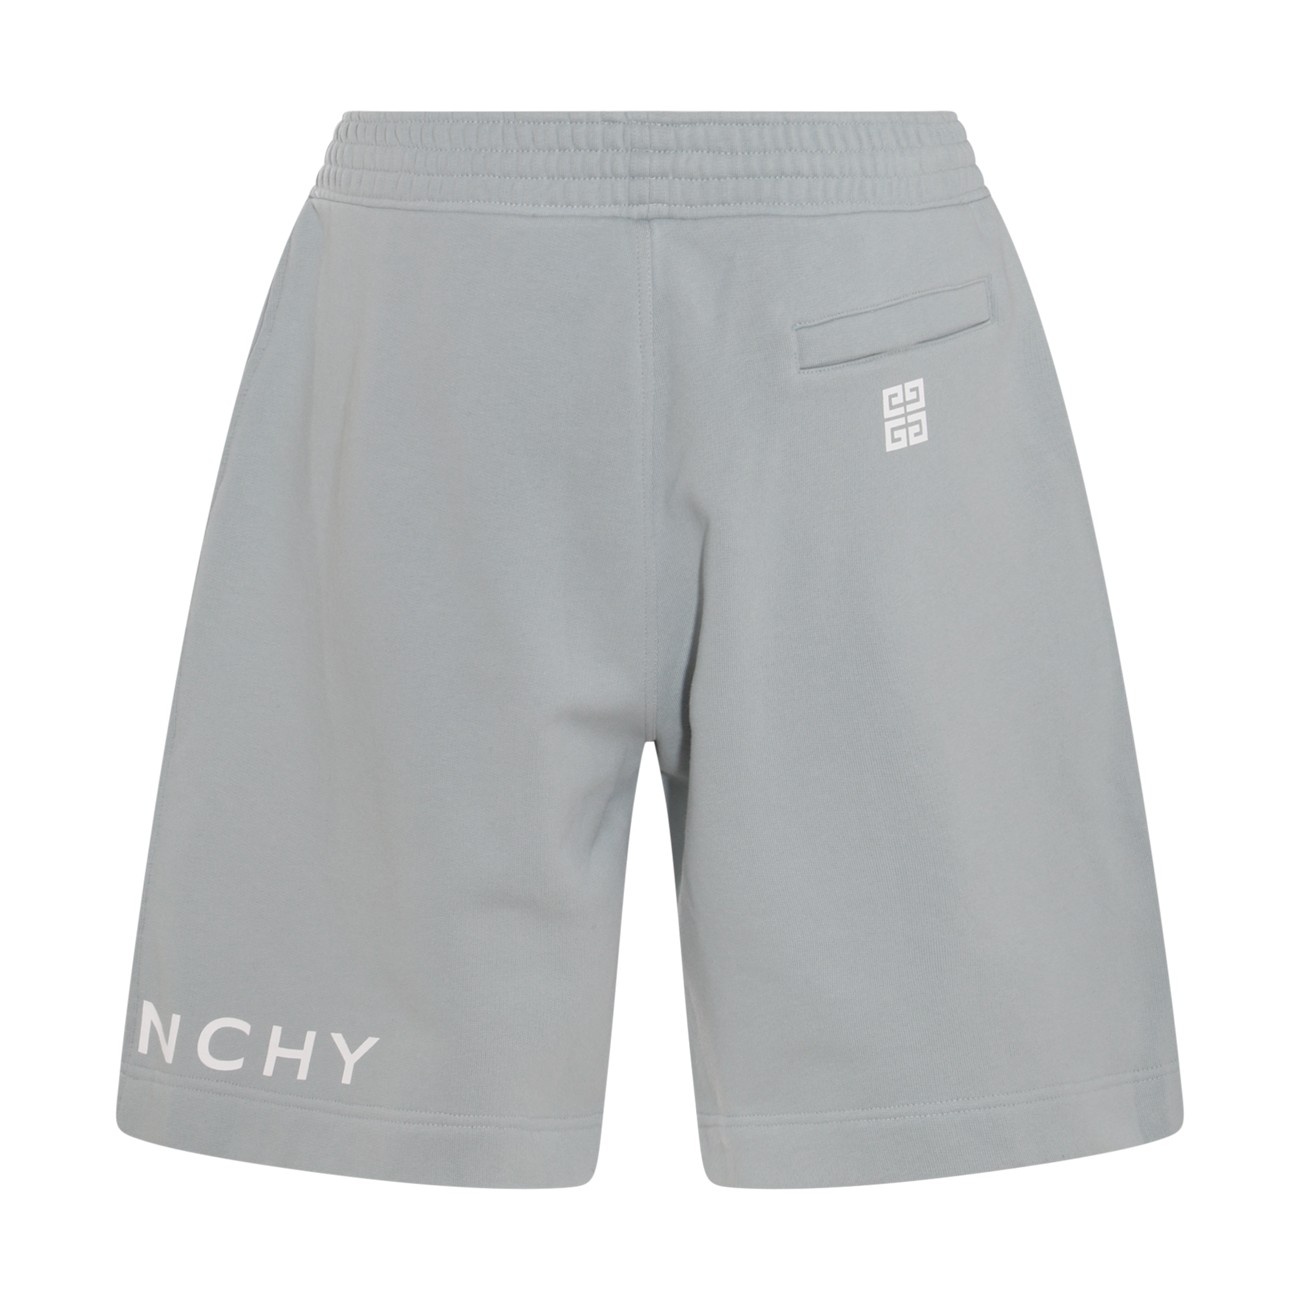 mineral blue cotton track shorts - 2